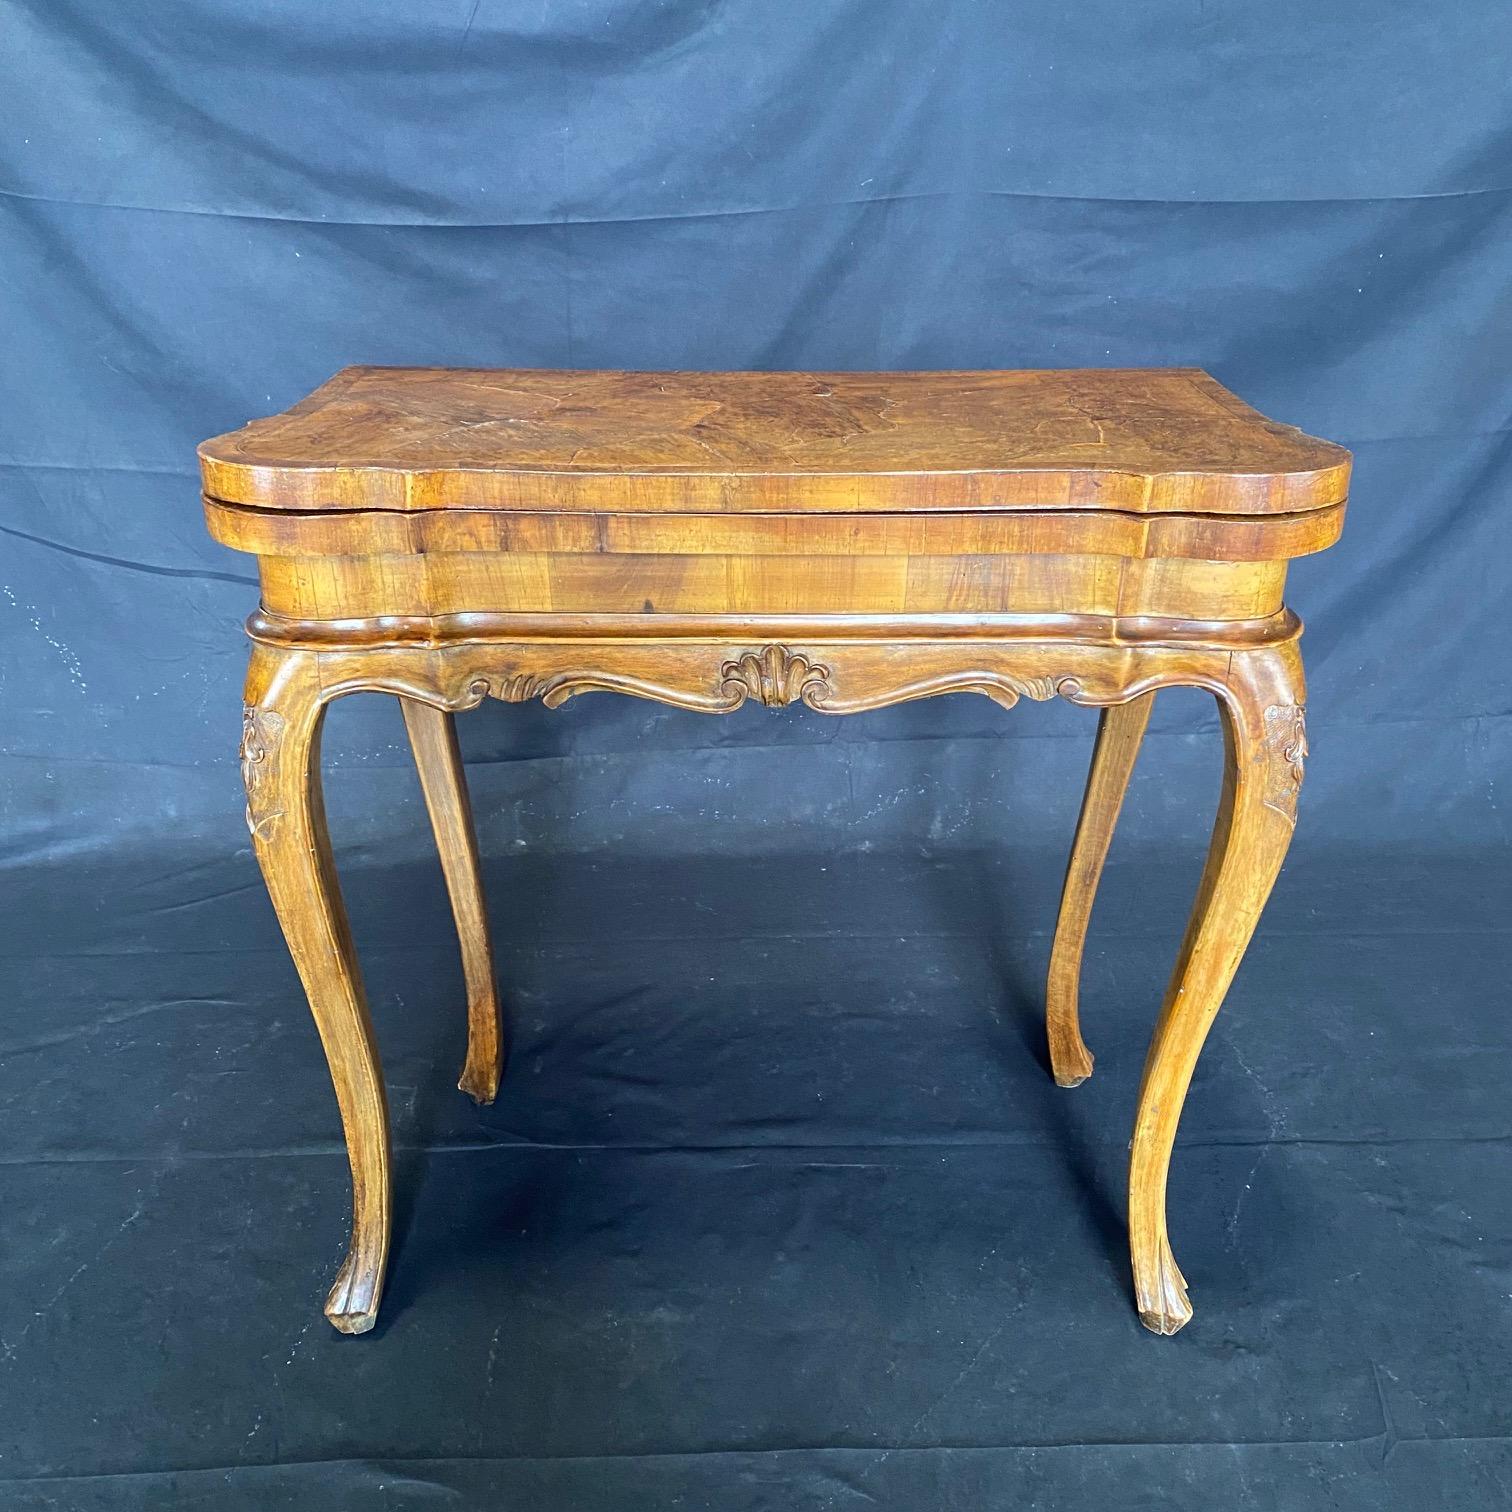 Italian 18th century burled walnut game or card table, side table or console, circa 1780. This very elegant table is made of walnut and its top is beautifully joined burled walnut. The table skirt and legs are highly carved Louis XV walnut, with